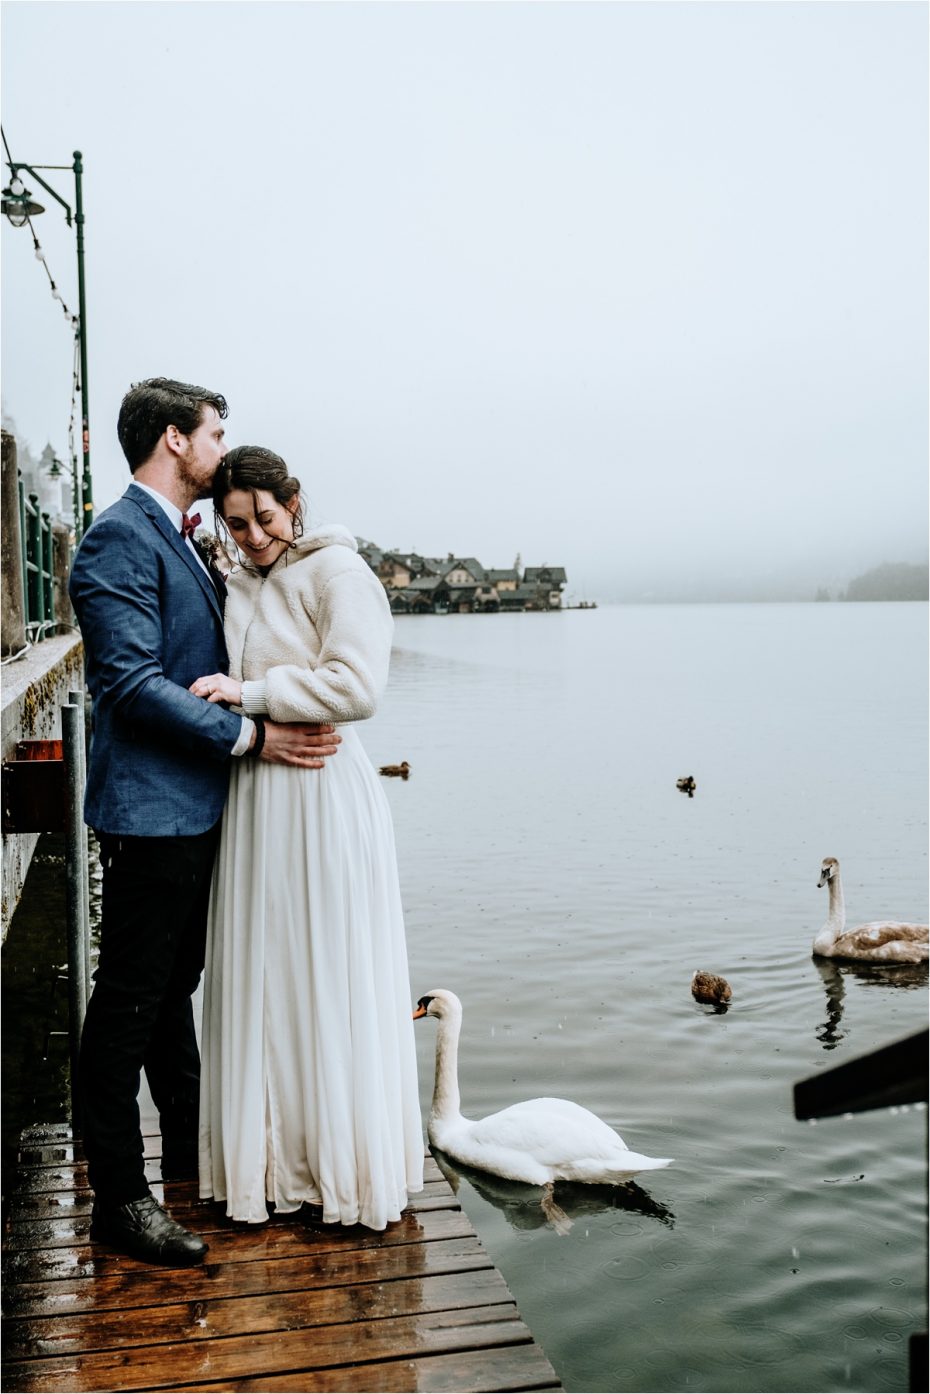 Swans swim up to the bride and groom after their Hallstatt wedding in Austria. Photos by Wild Connections Photography